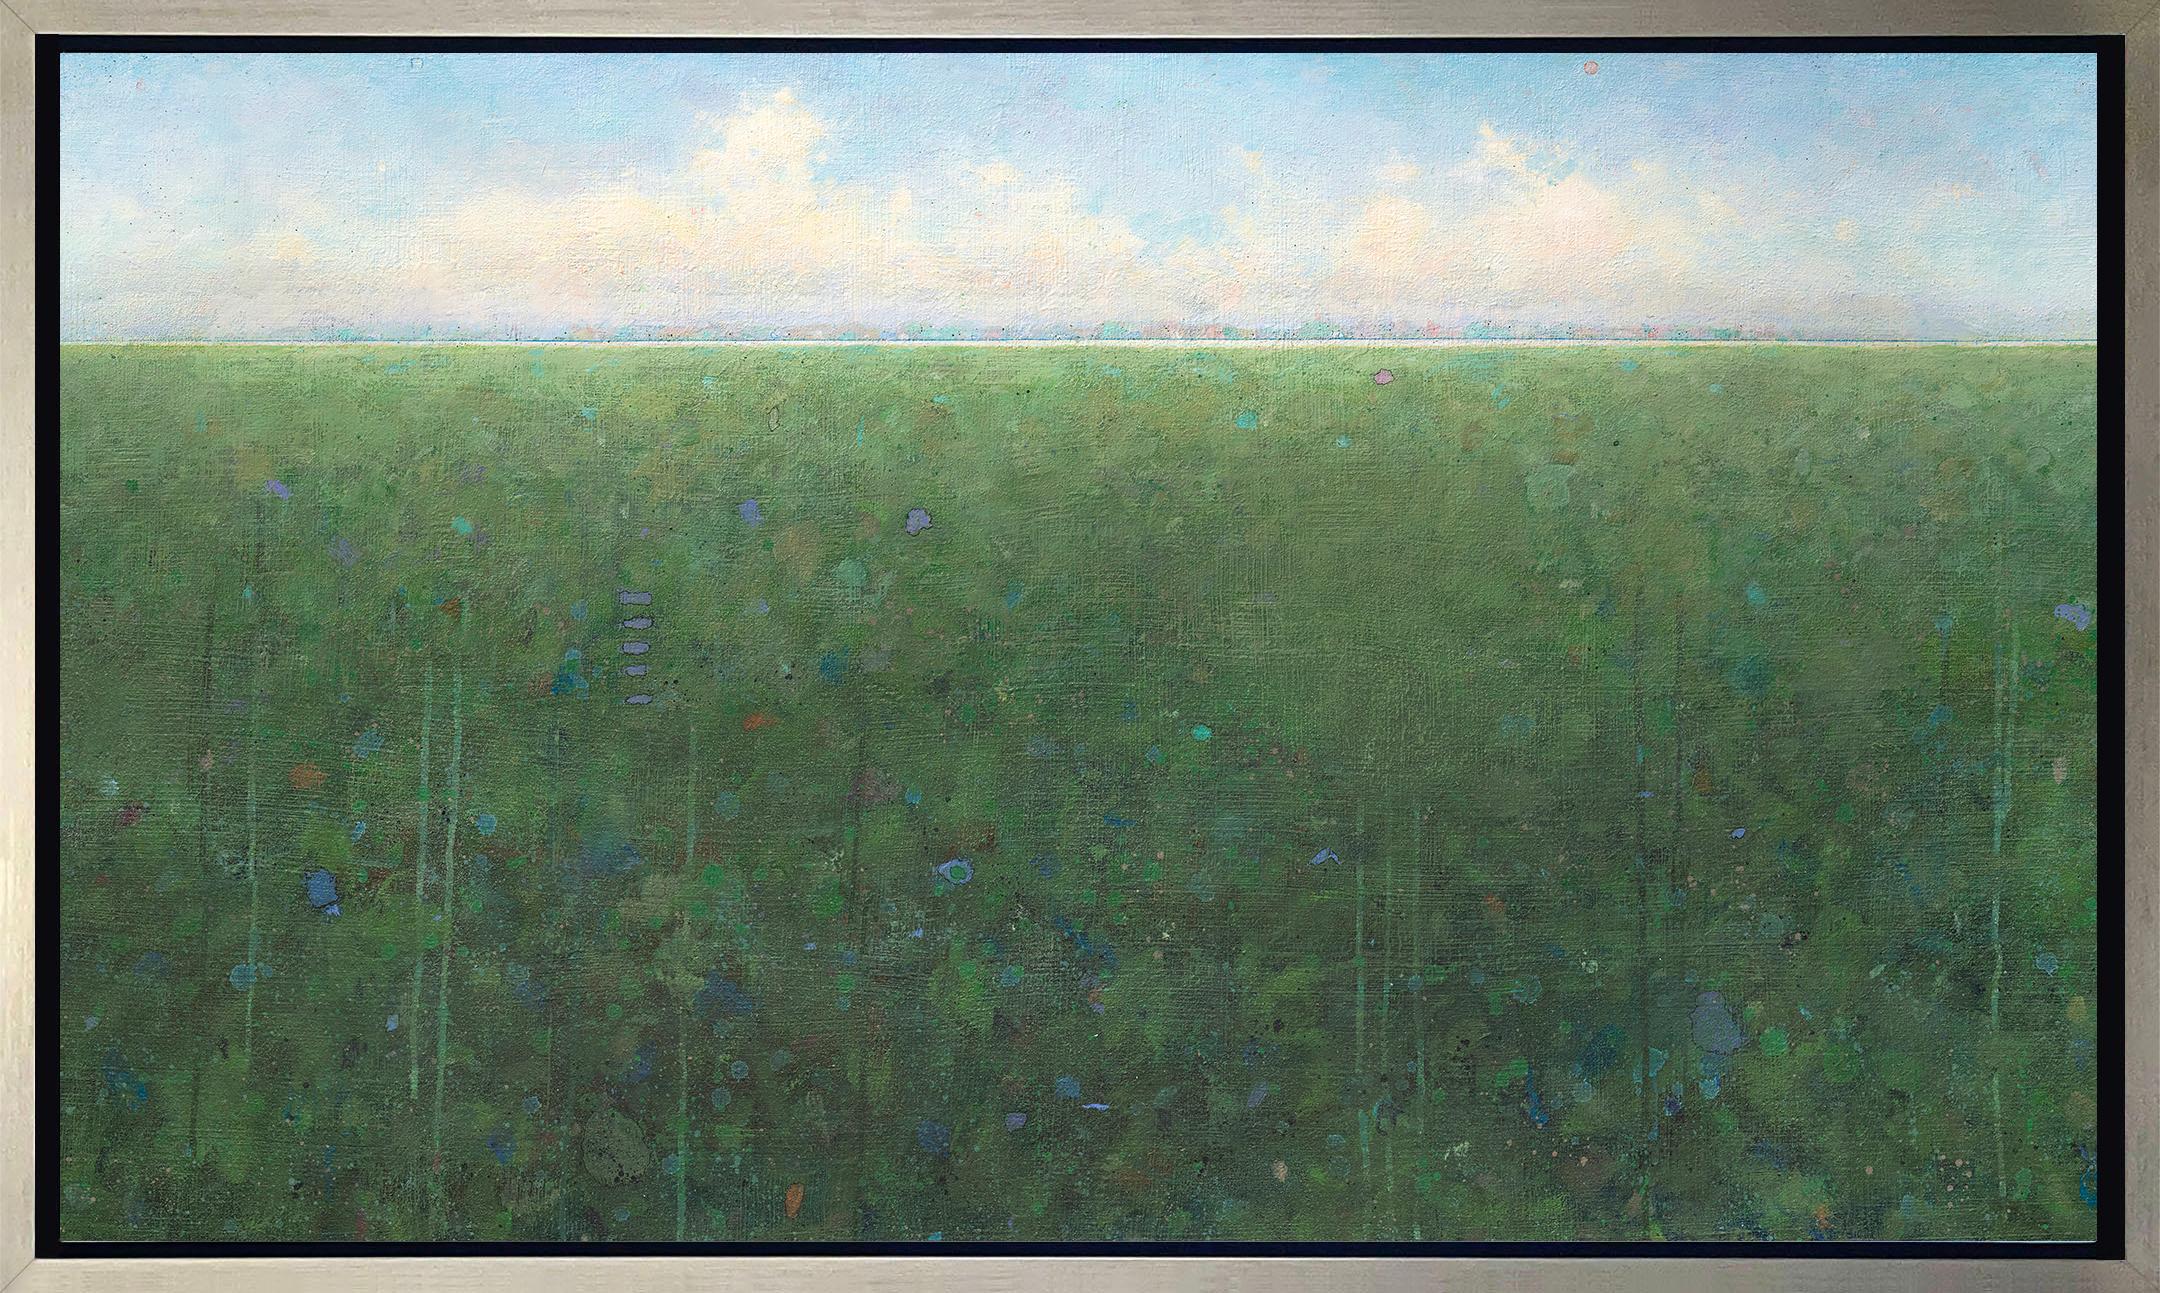 Elwood Howell Abstract Print - "Long View, " Framed Limited Edition Giclee Print, 36" x 60"